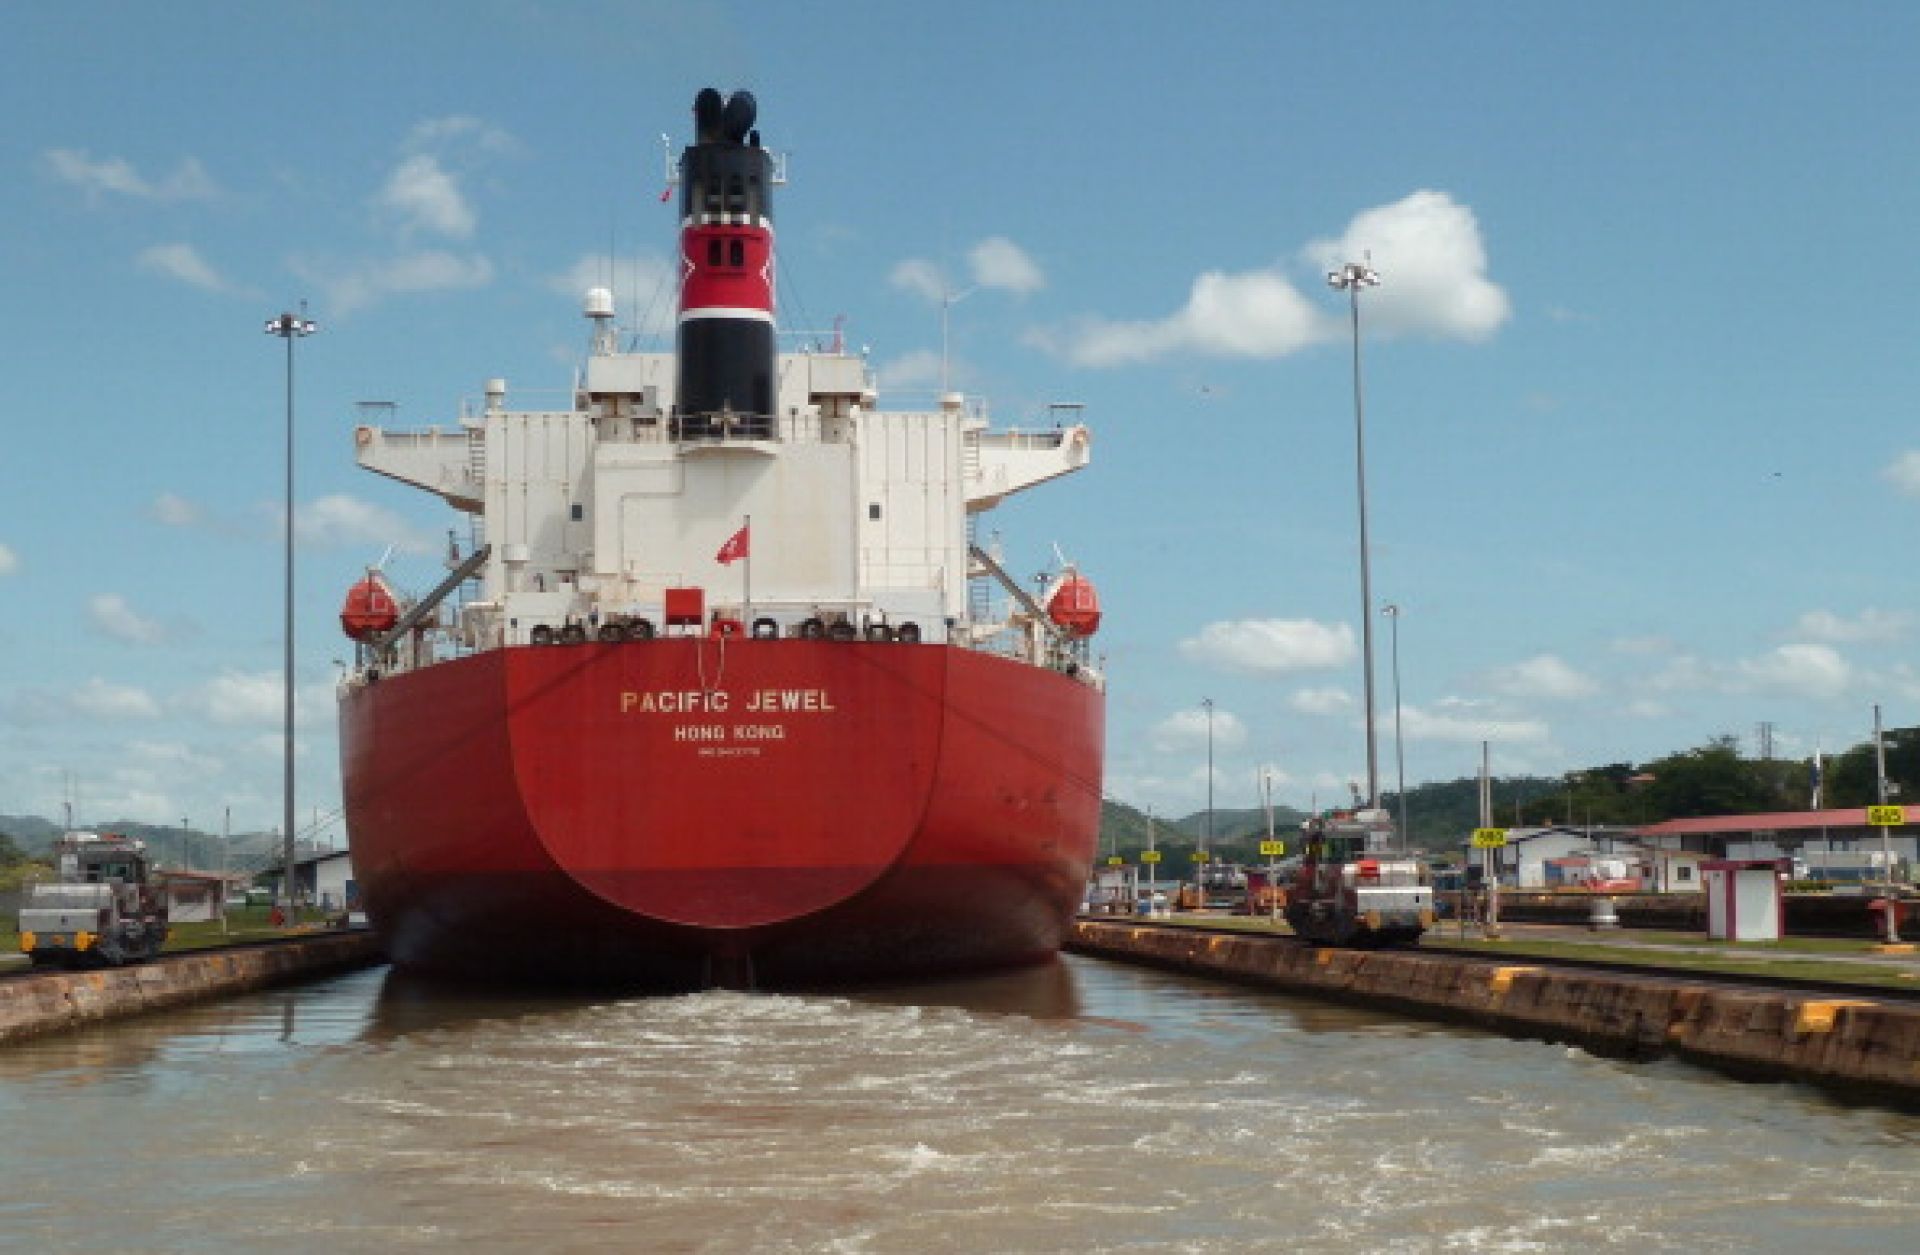 The Panama Canal's Expansion: New Options for Trade